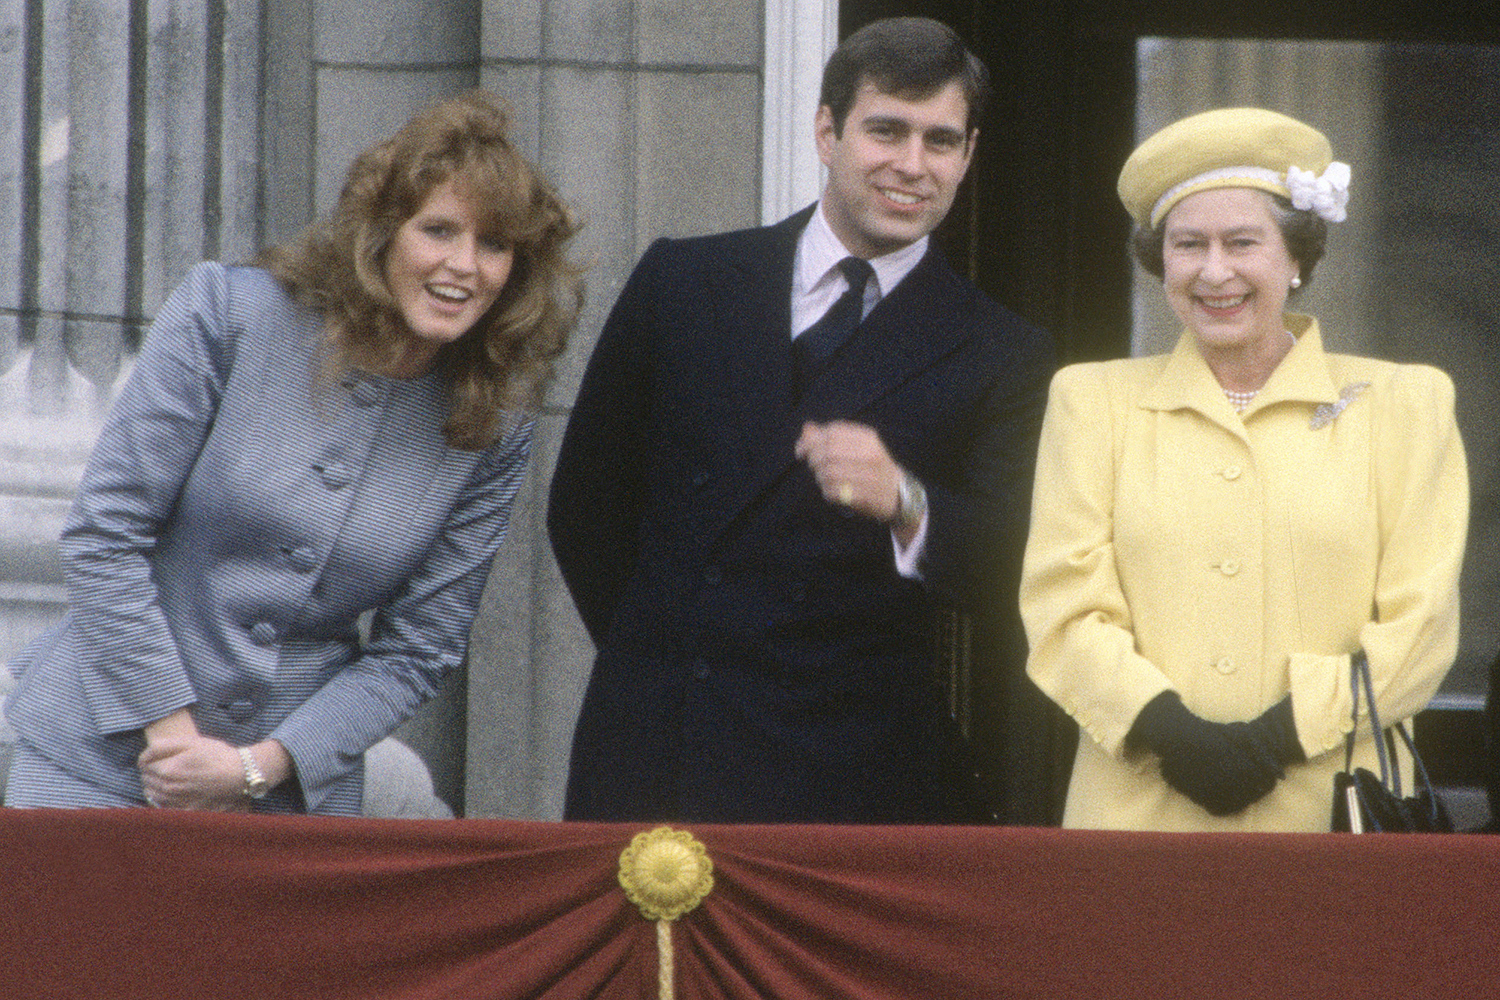 Queen Elizabeth II celebrates her sixieth birthday on April 21, 1986 at Buckingham Palace in London. The Queen was joined on the balcony of the palace by Prince Philip (R), Prince Andrew and his wife Sarah, Duchess of York, as they listened to thousands of children singing.